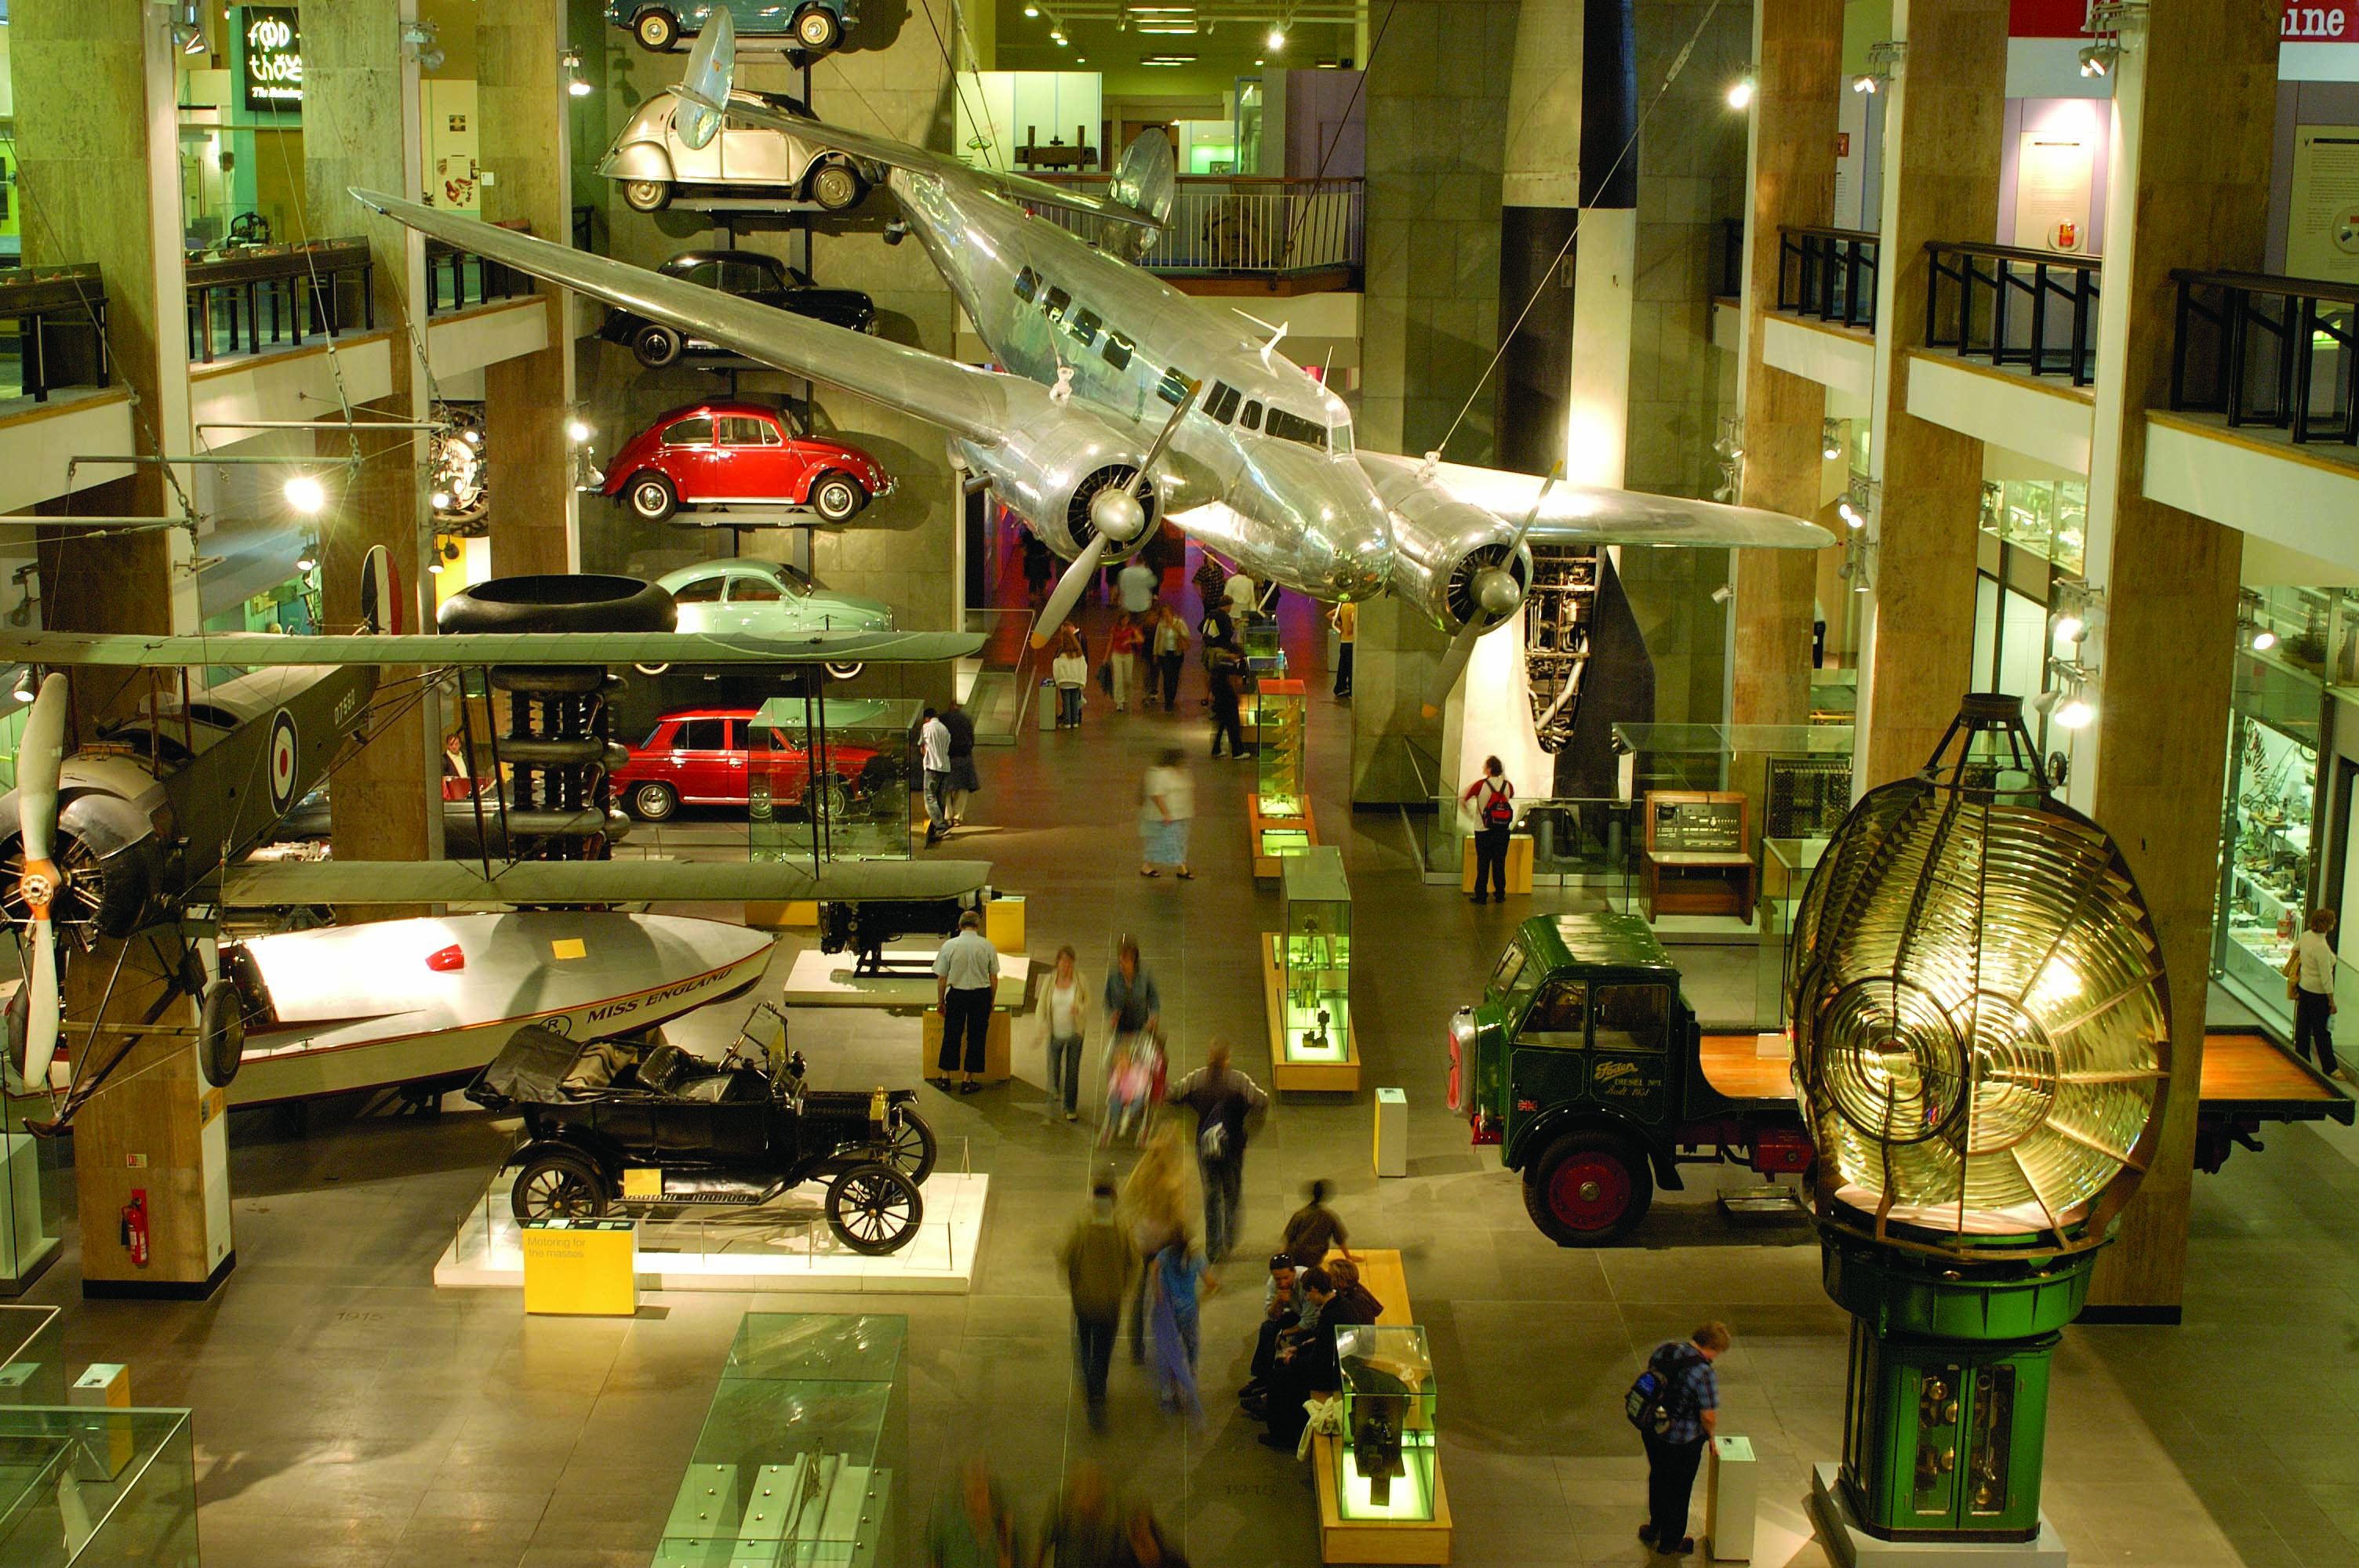 science museums